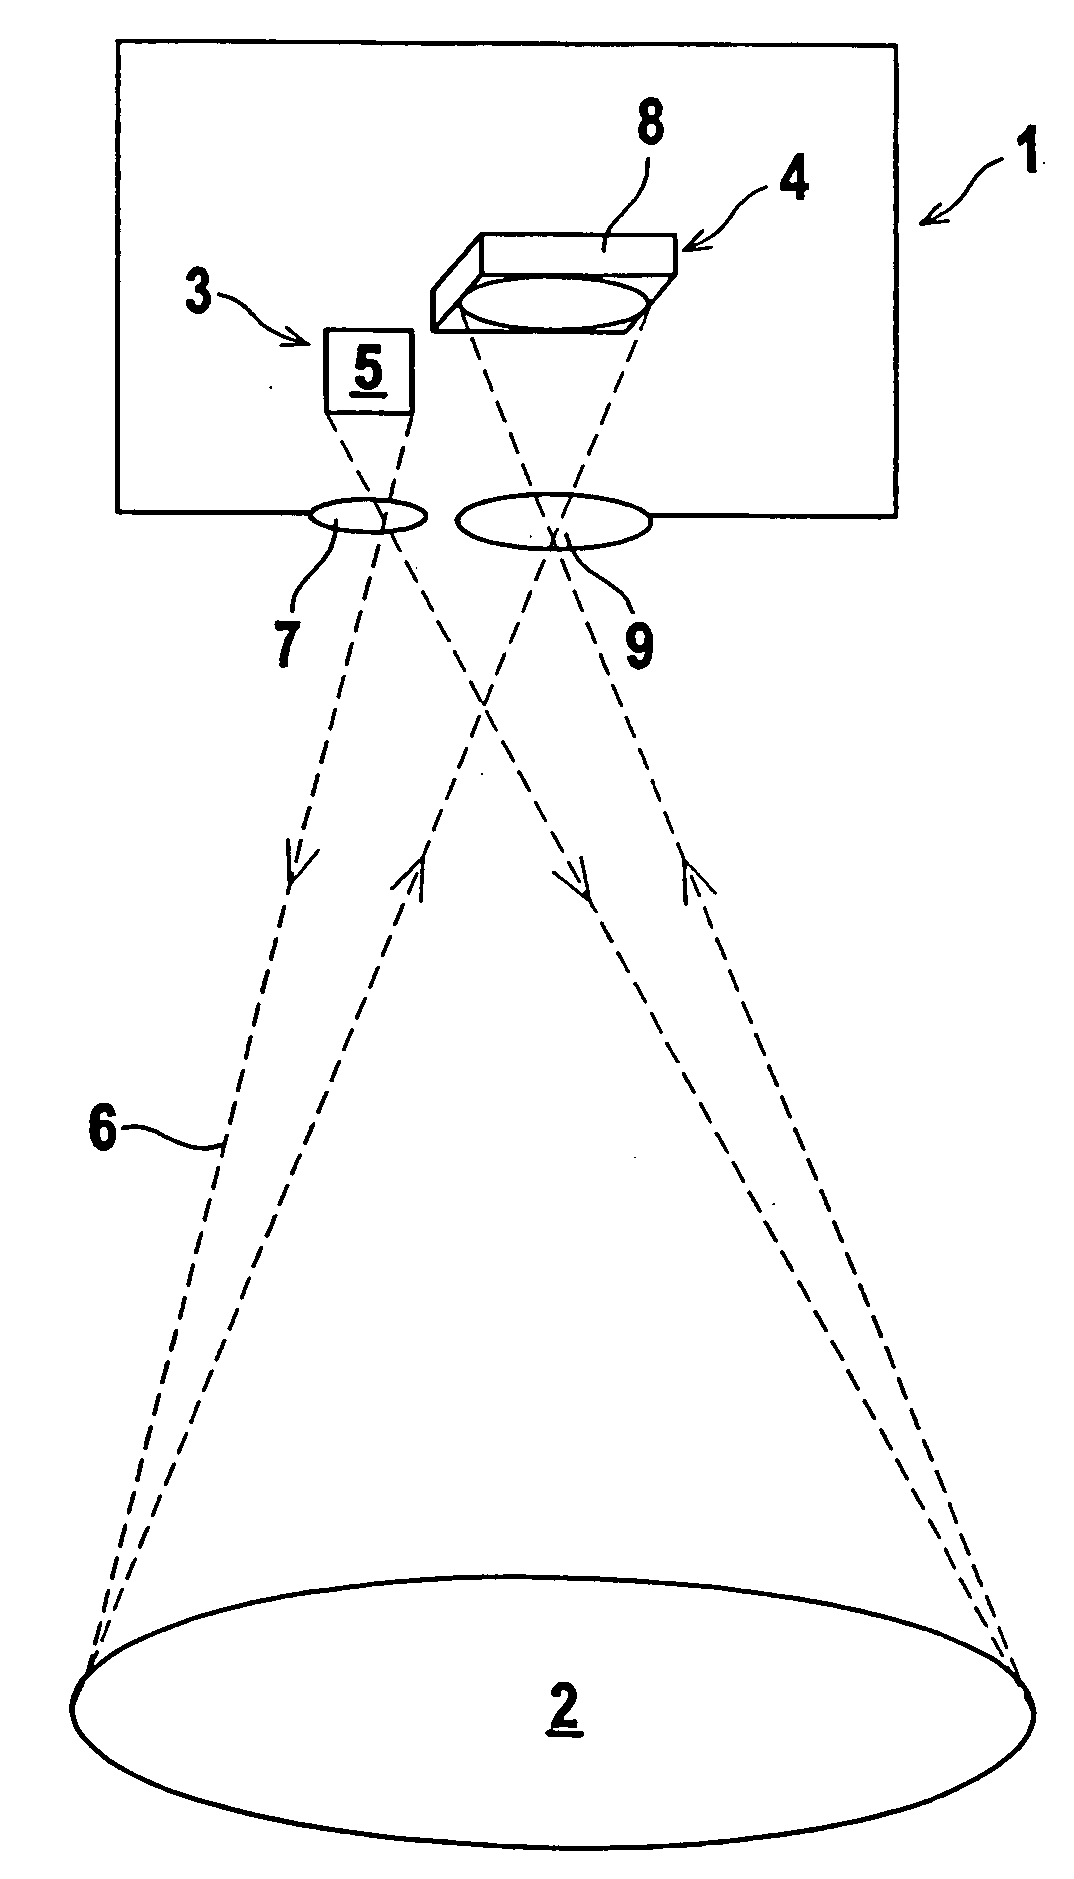 Device for monitoring an area of coverage on a work tool